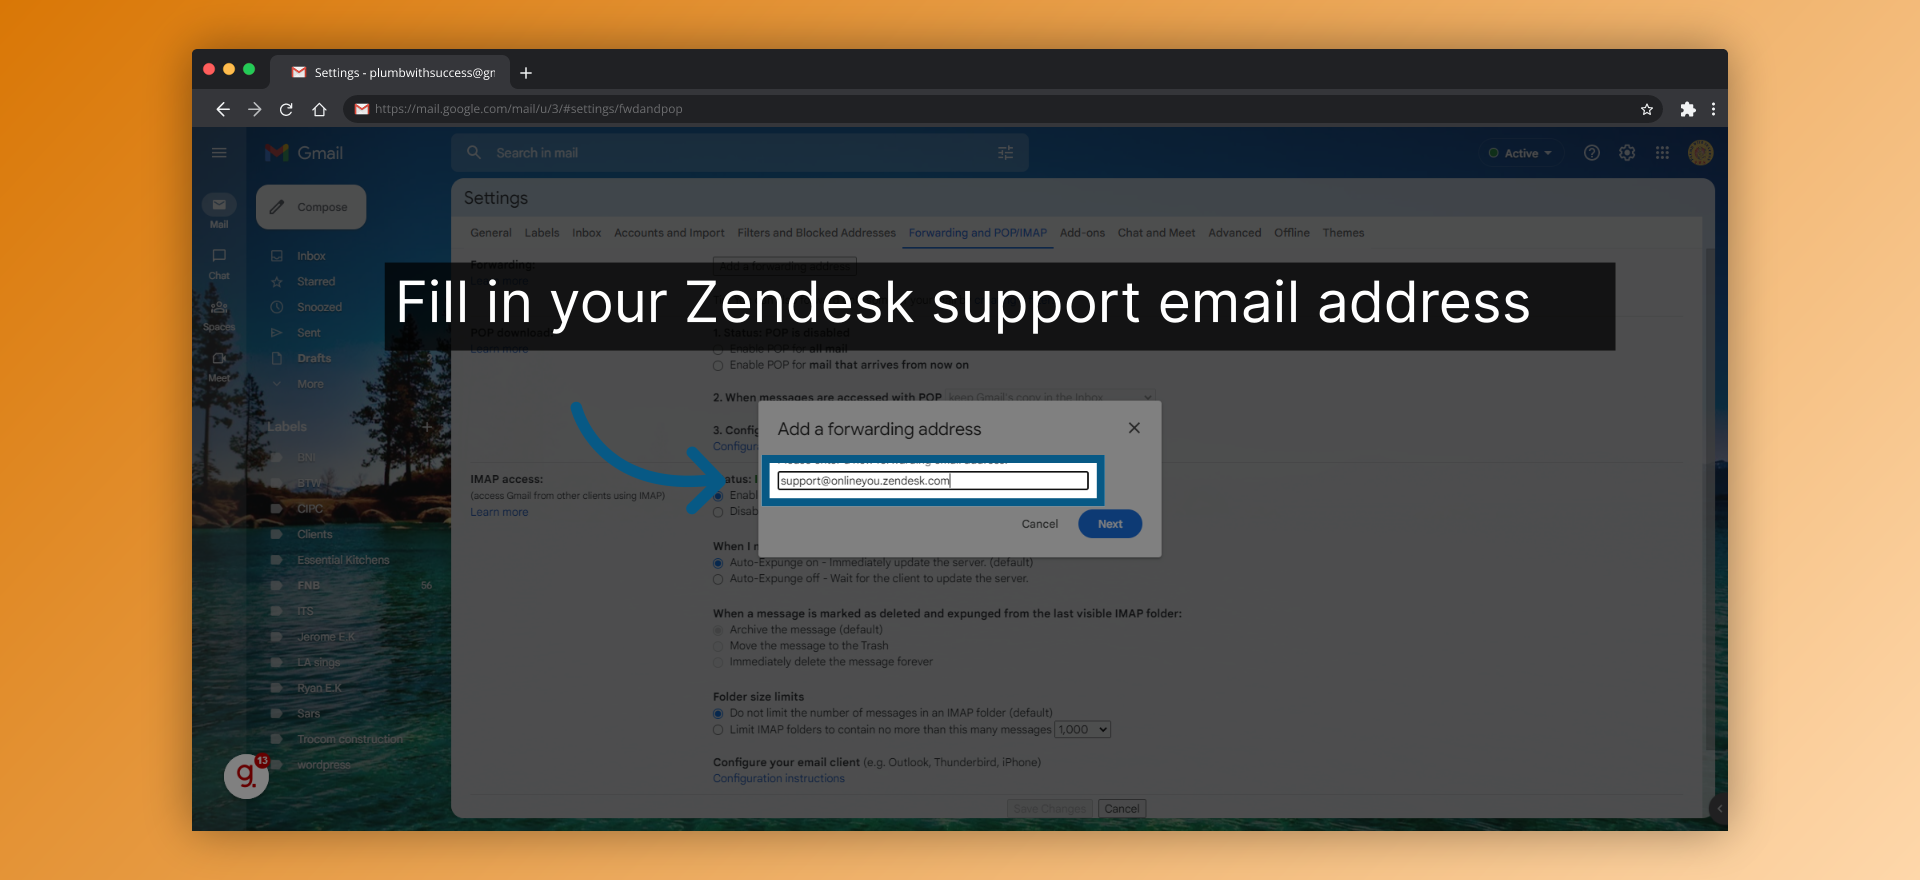 Fill in your Zendesk support email address